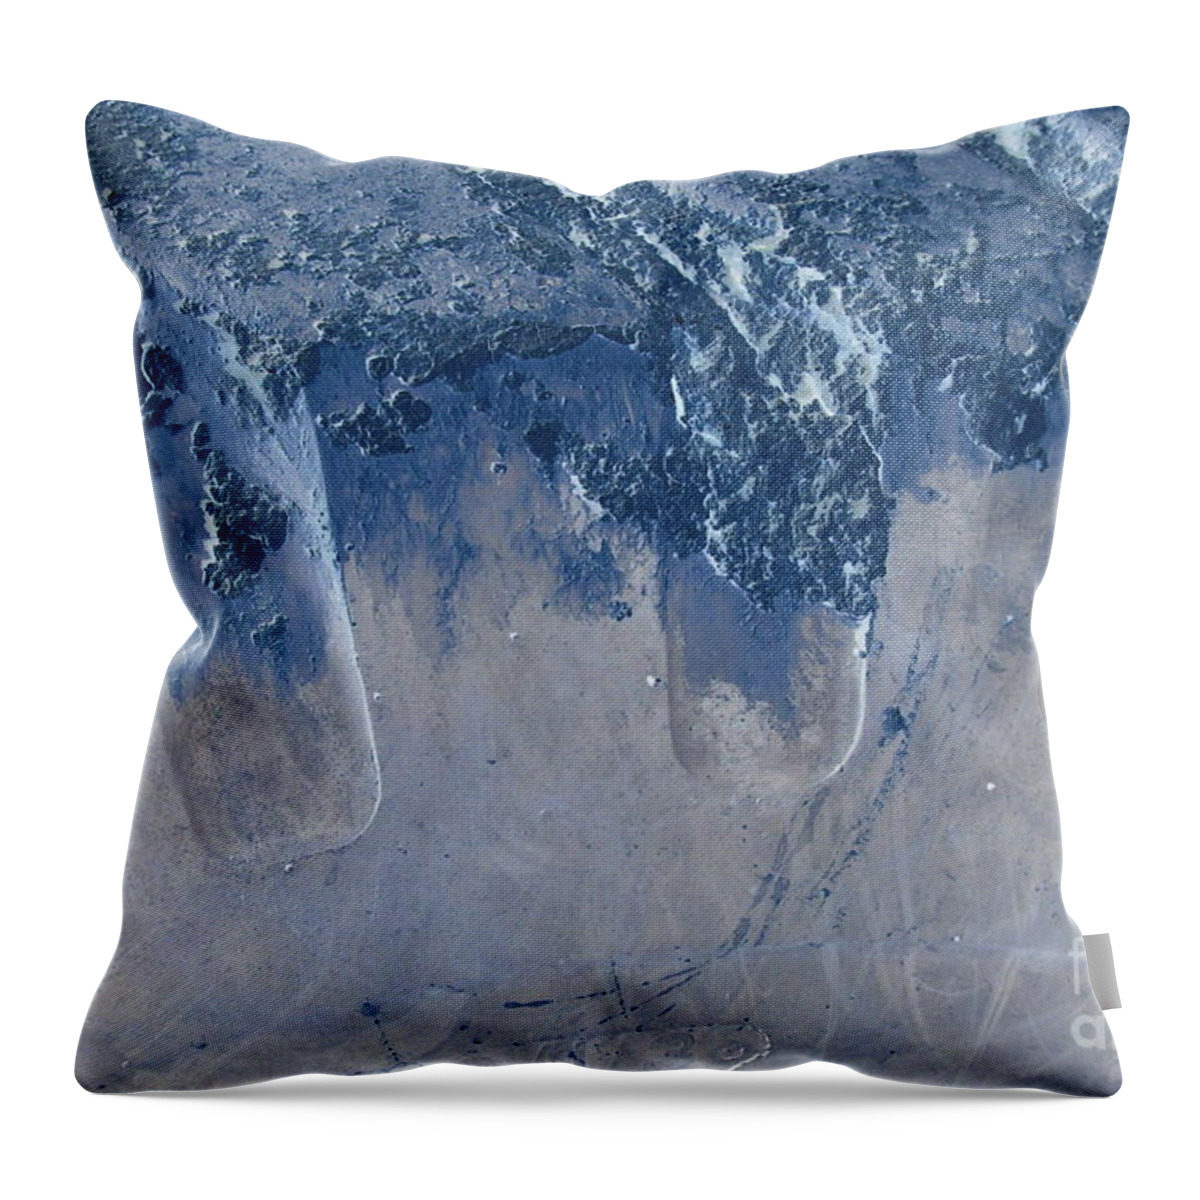 Construction Throw Pillow featuring the photograph Blue Claw by Heather Kirk